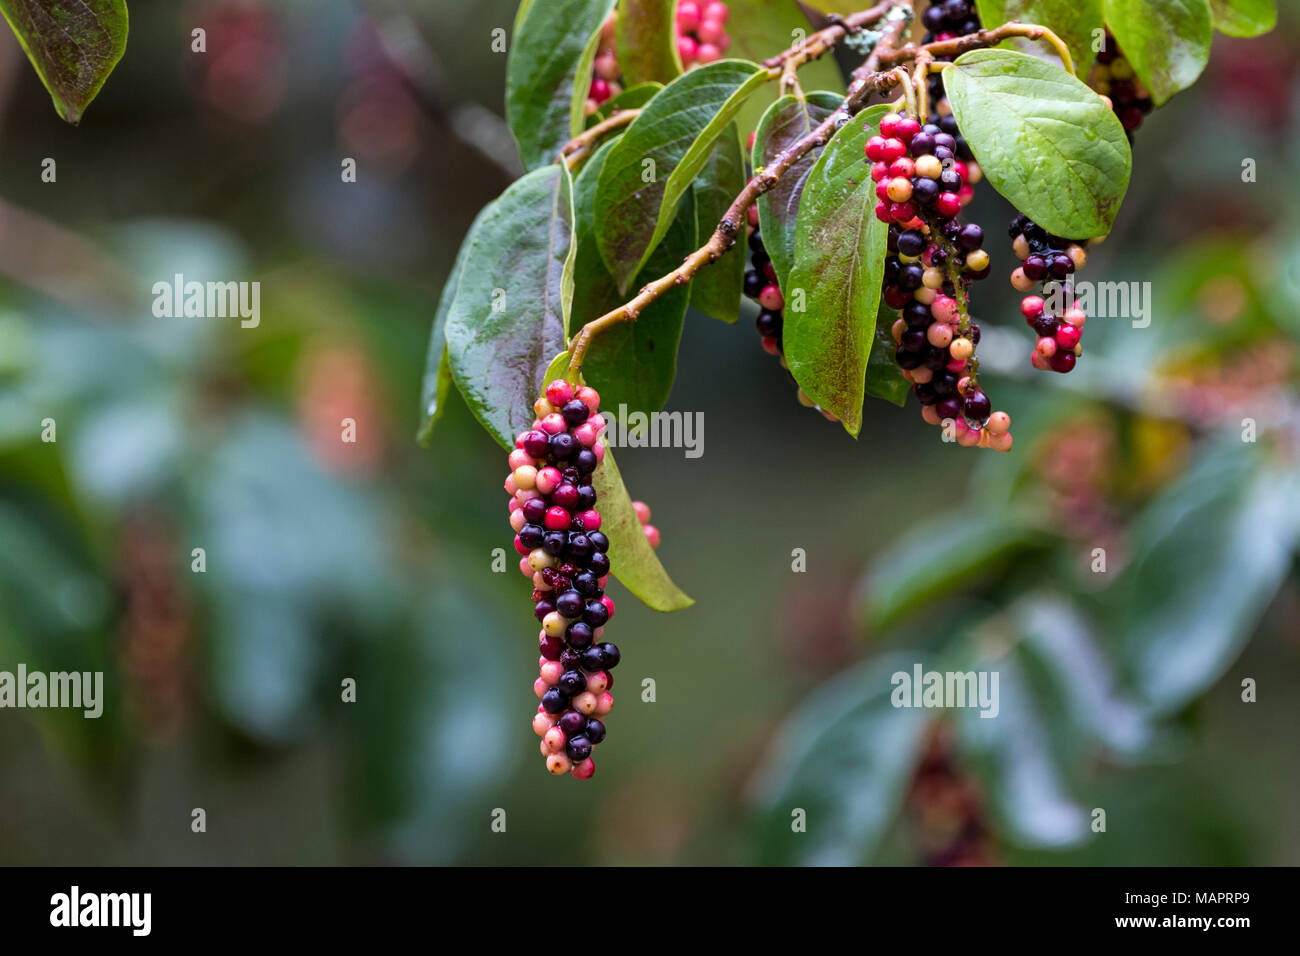 Close up of colorful red black and yellow fruit green leaves and branches of the Tassel Berry tree in garden setting Stock Photo